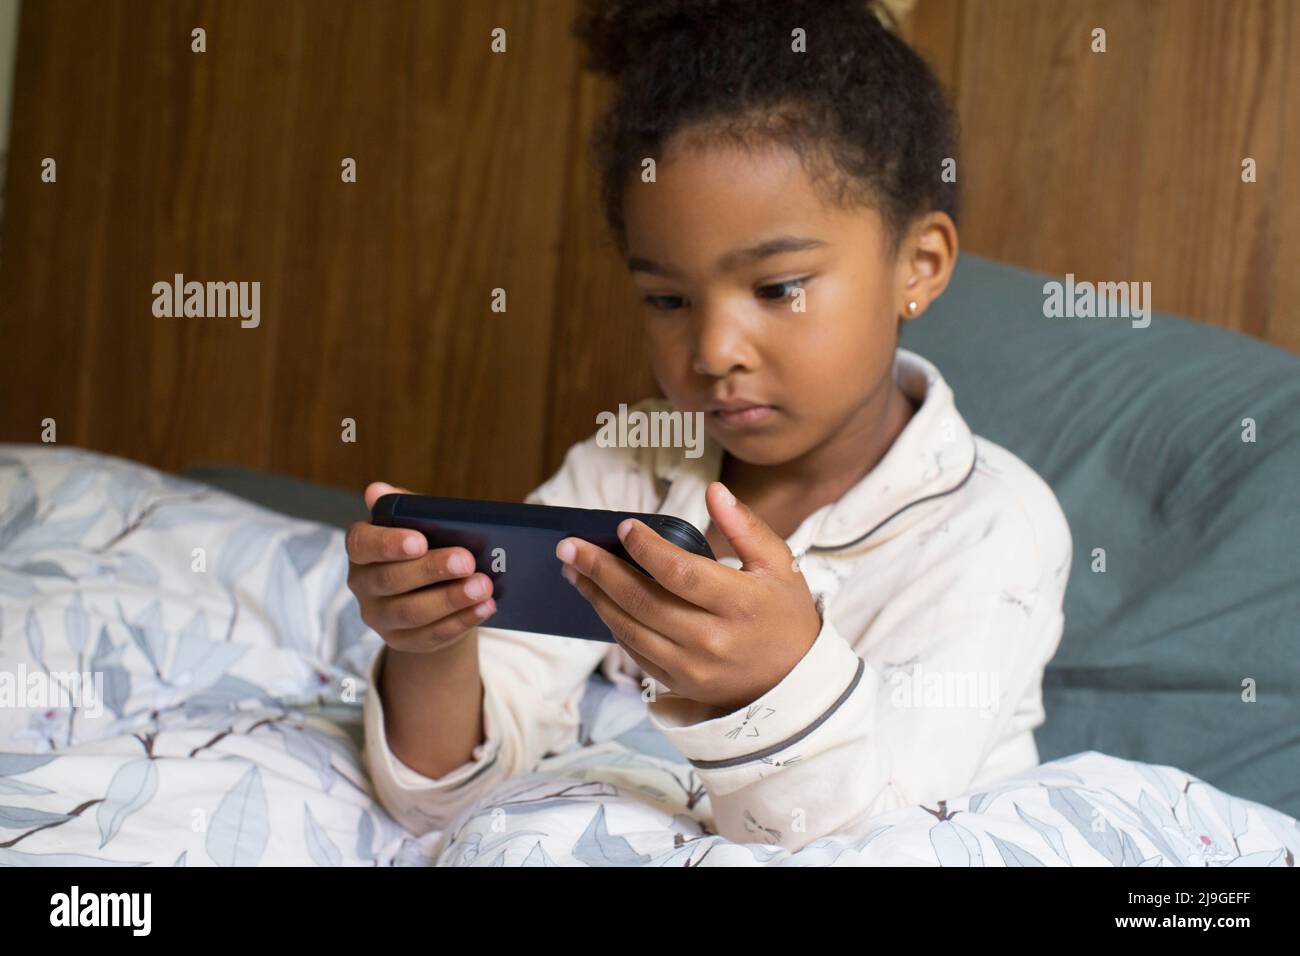 Girl looking at smart phone Stock Photo